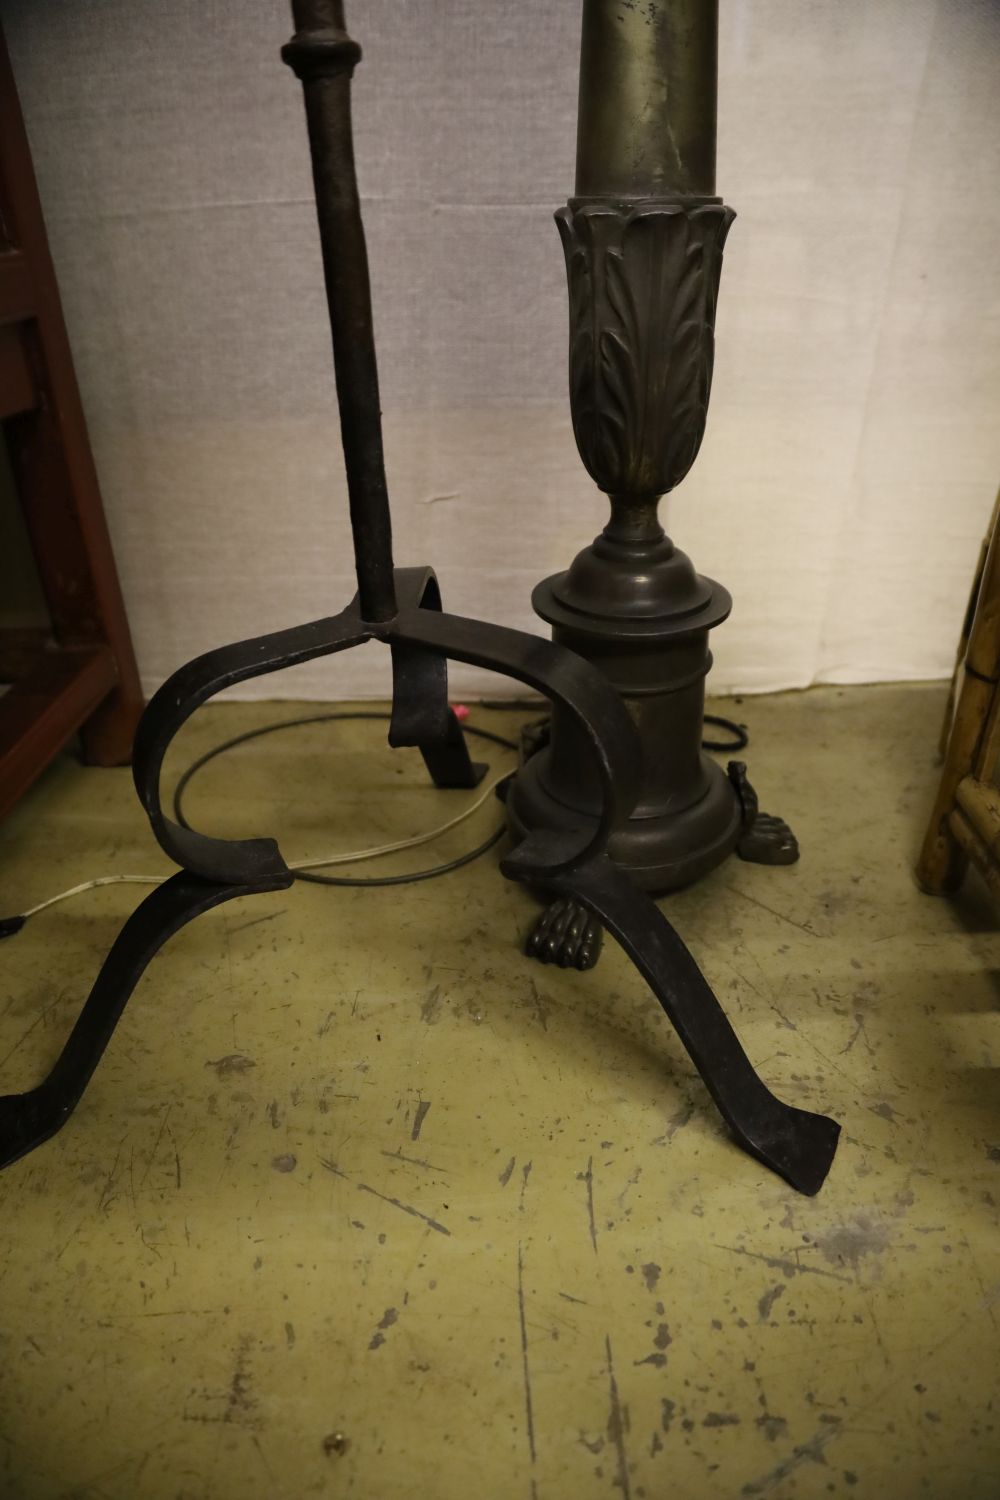 A wrought iron church style candlestand and a metal standard lamp and shade